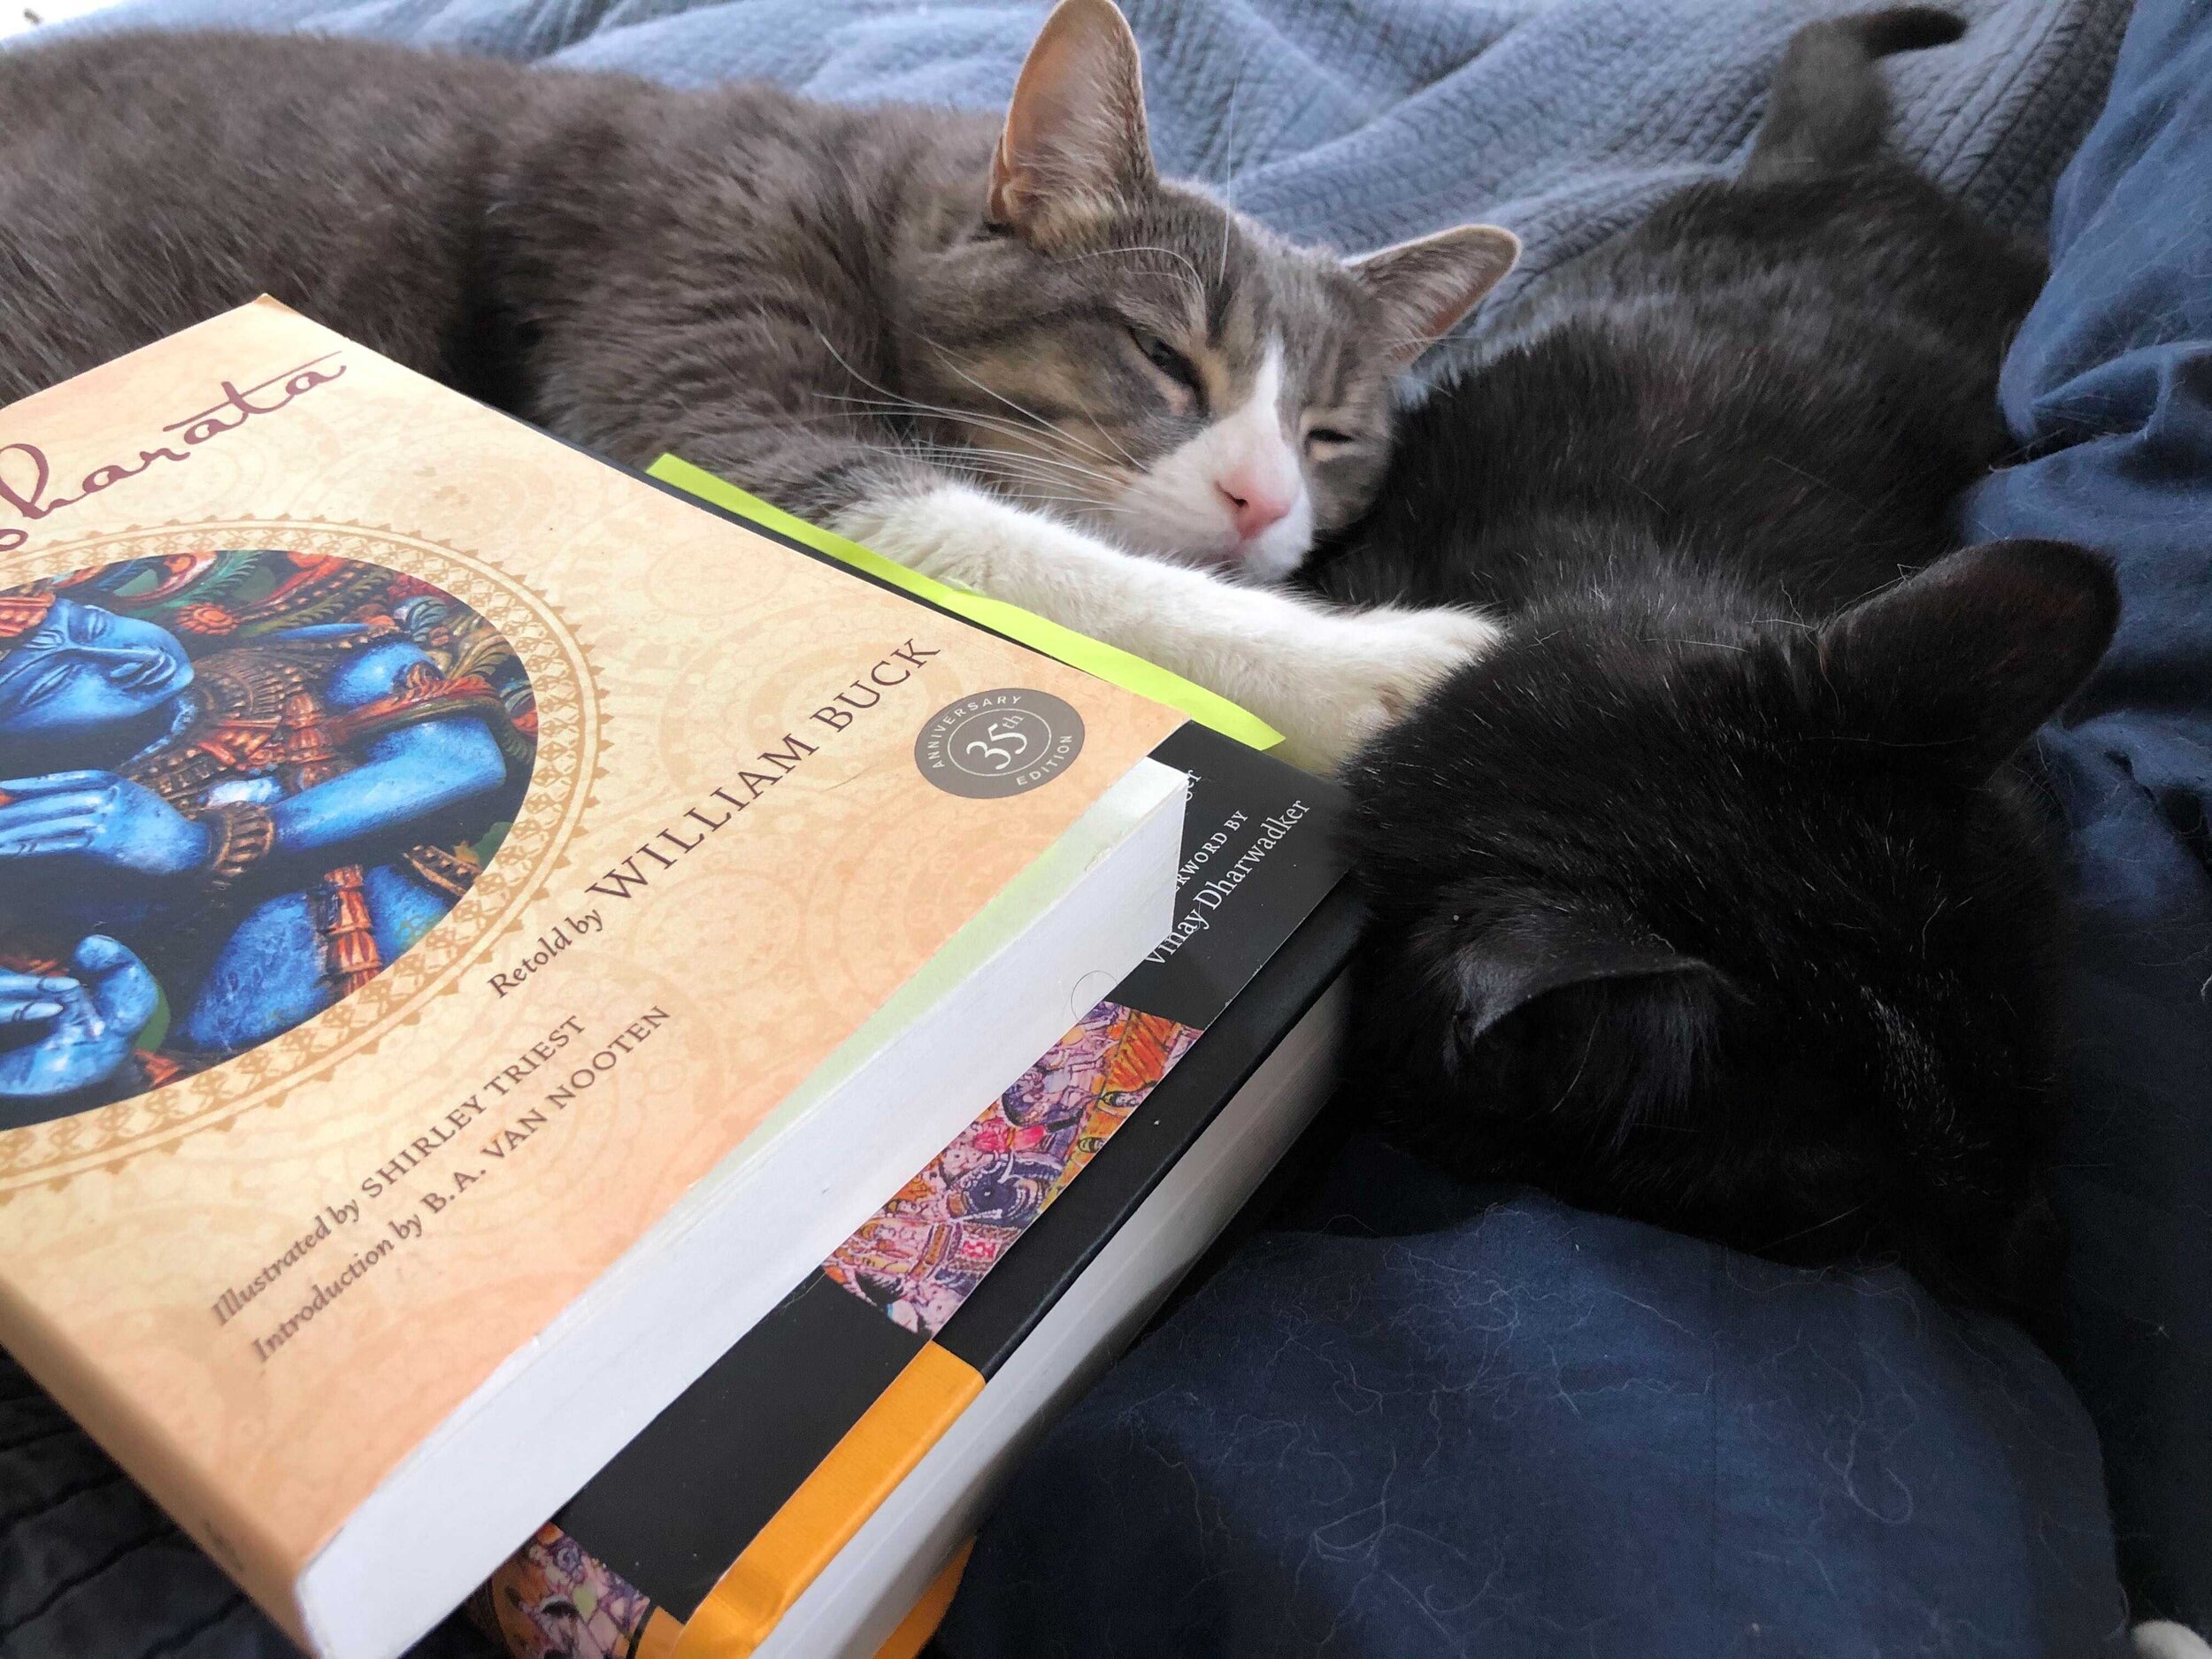 An image of Bobby sleeping with another cat and some copies of the Mahabharata.